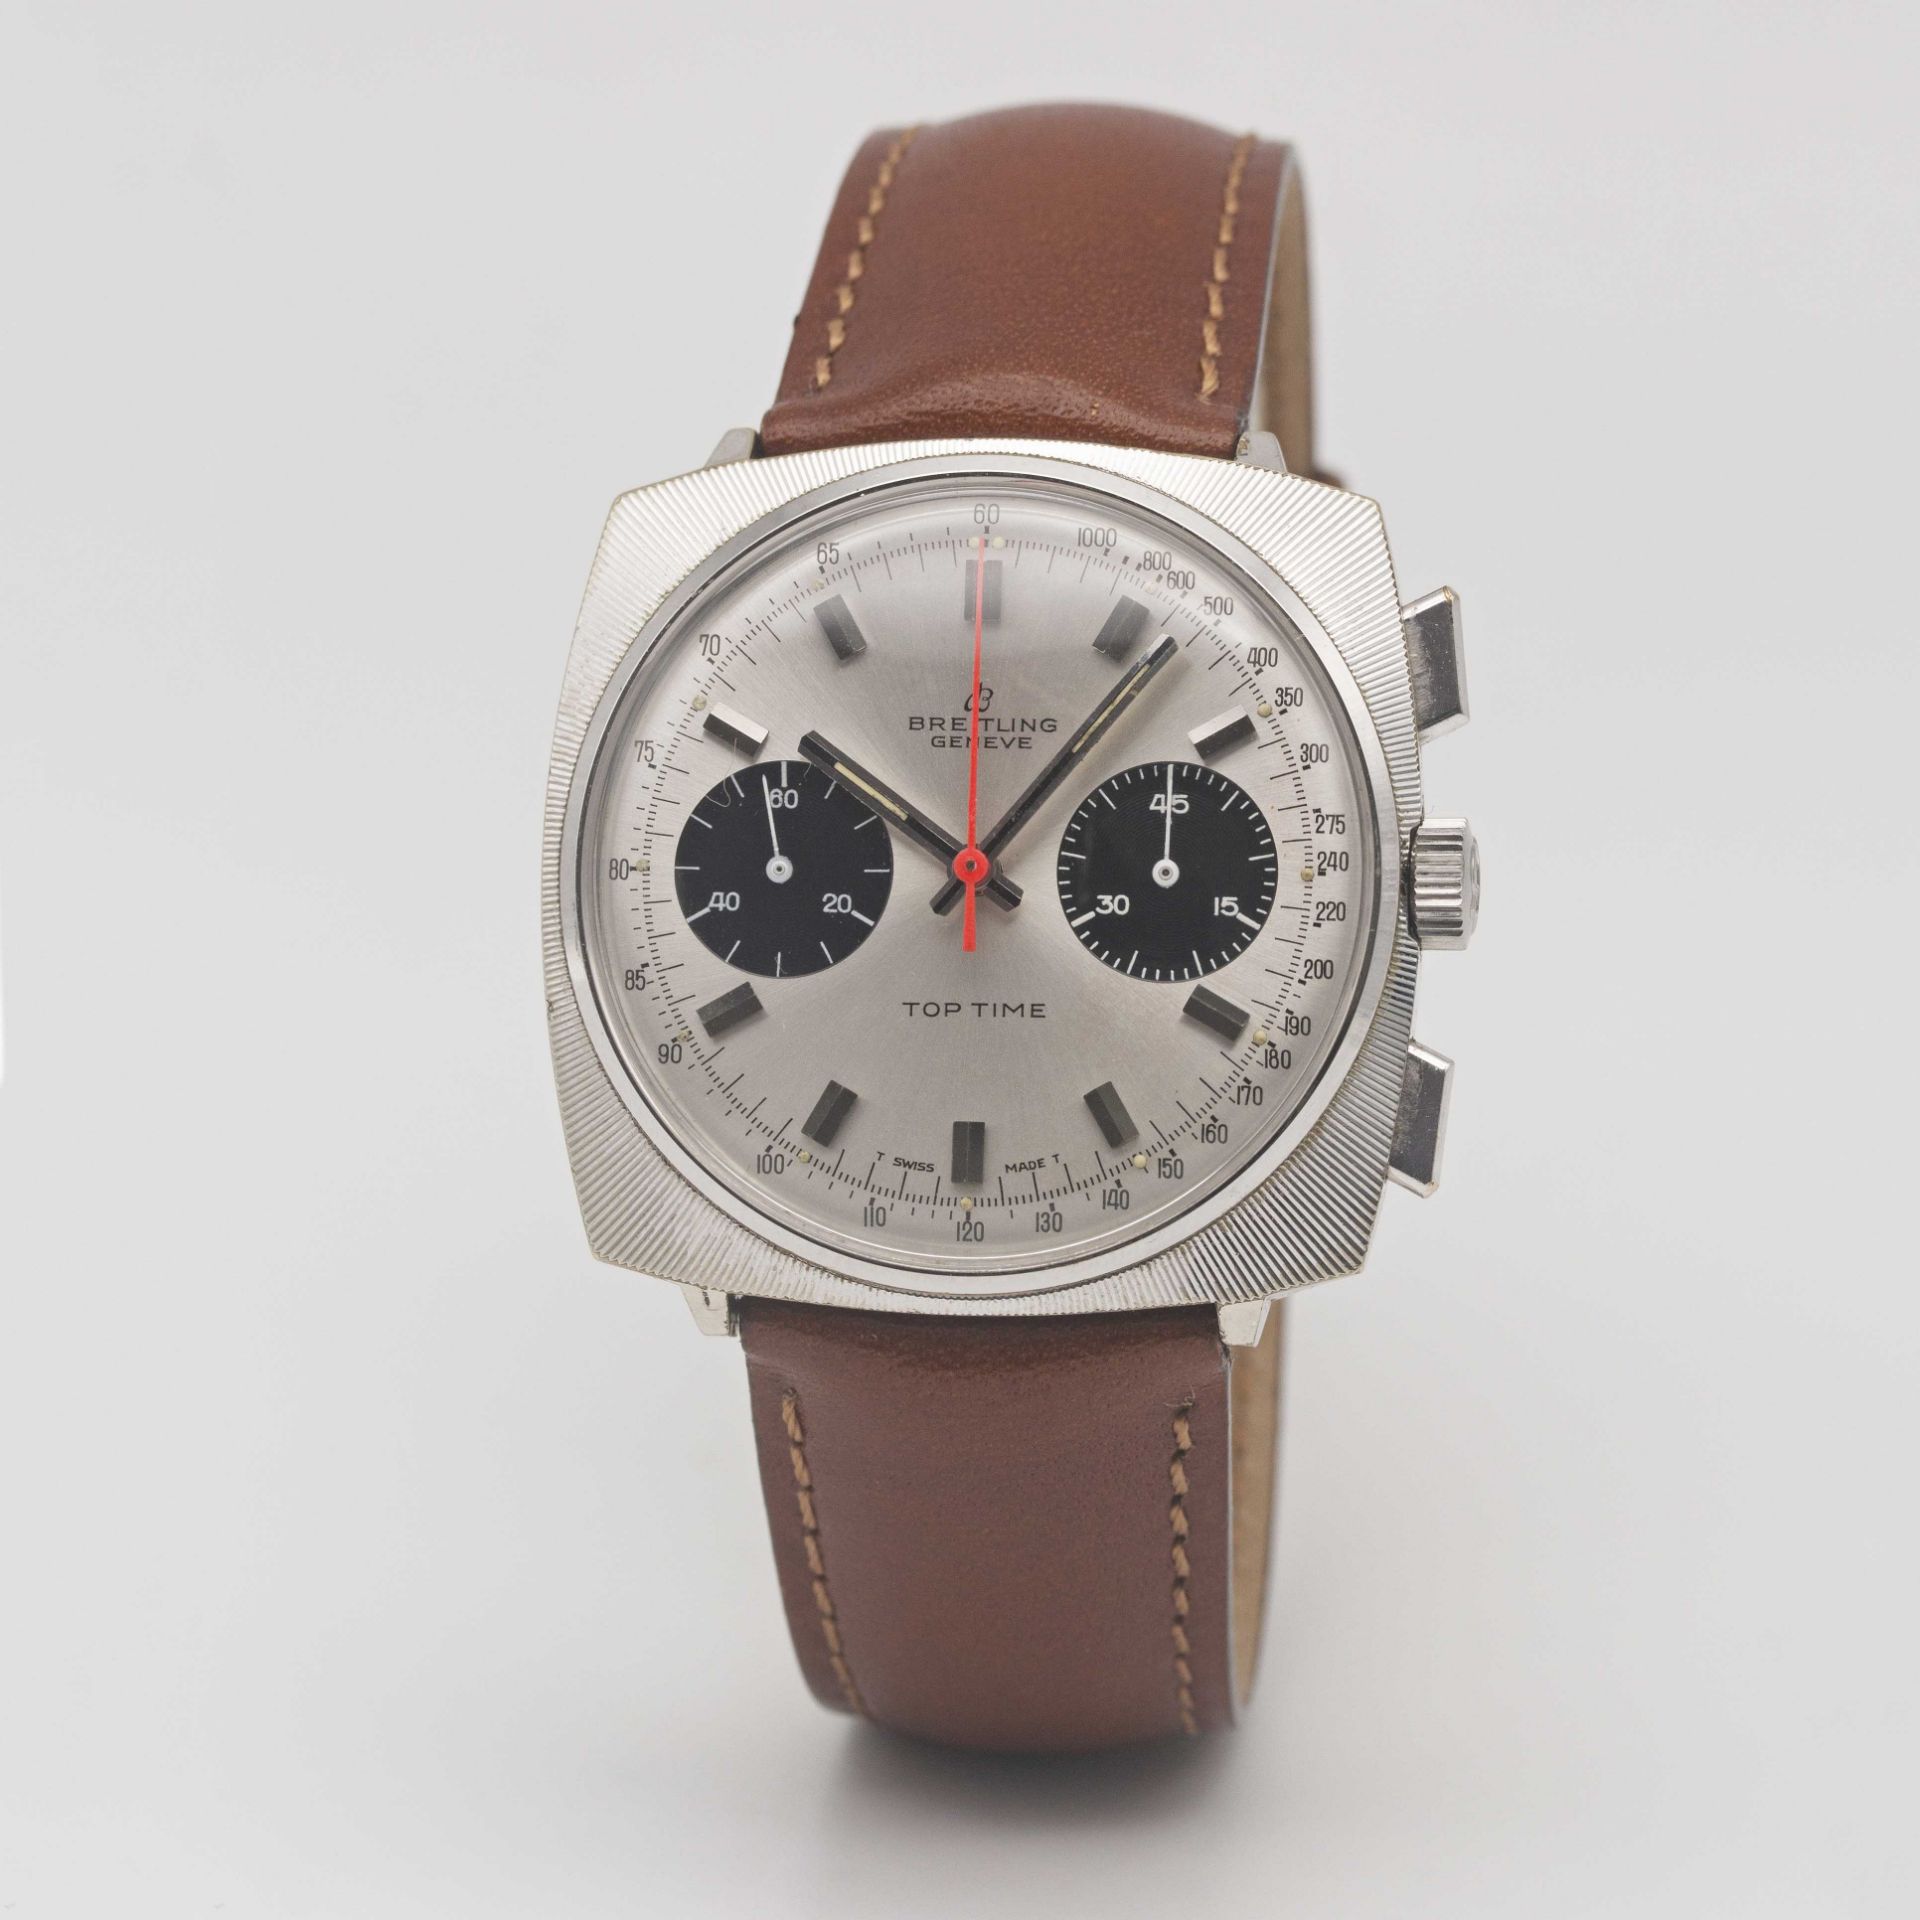 A GENTLEMAN'S BREITLING TOP TIME CHRONOGRAPH WRIST WATCH CIRCA 1969, REF. 2006/33 WITH "PANDA" - Image 4 of 9